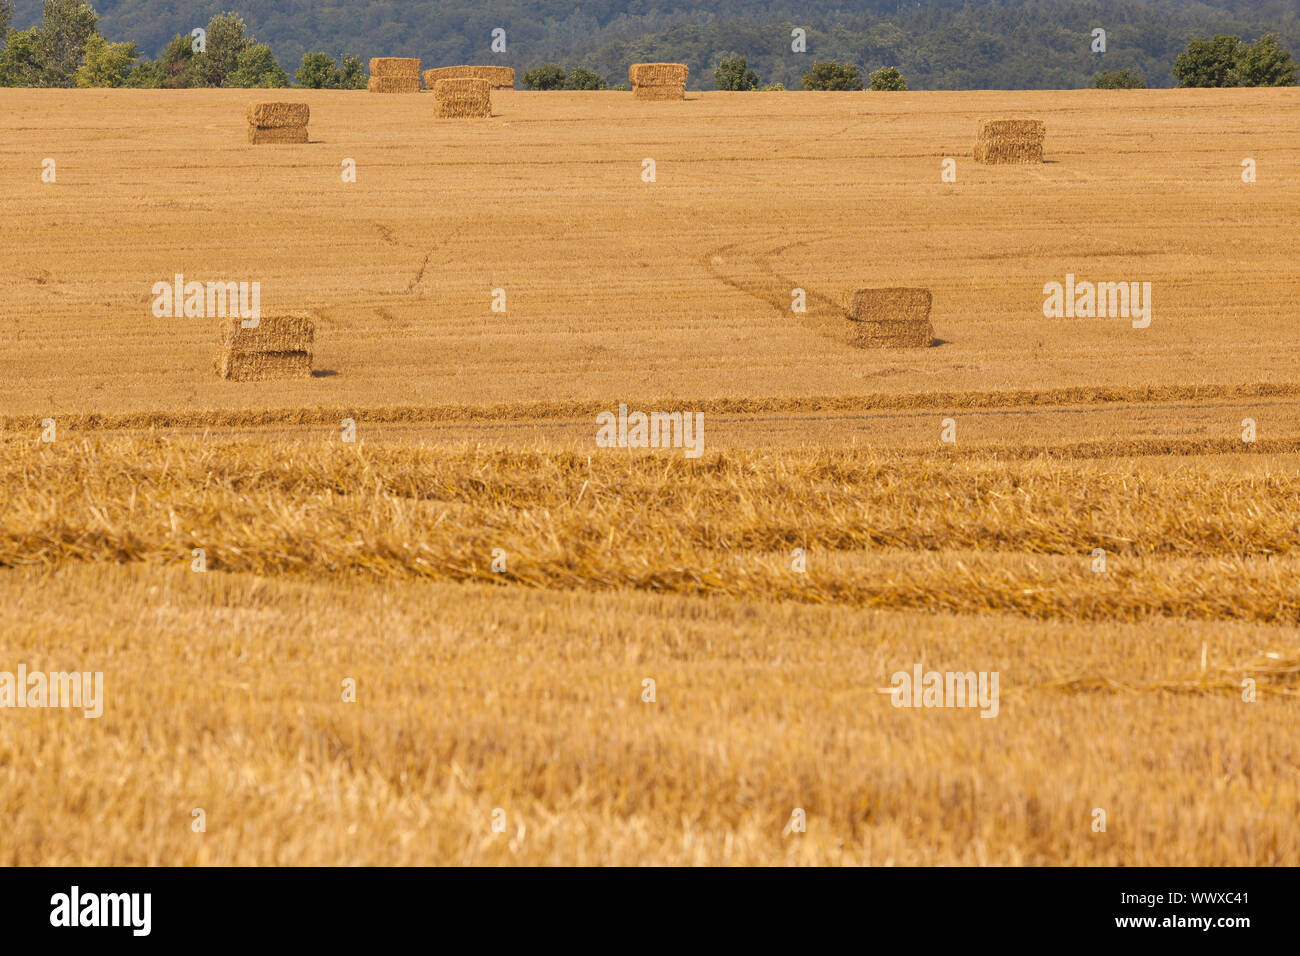 Grain field with straw bales Stock Photo